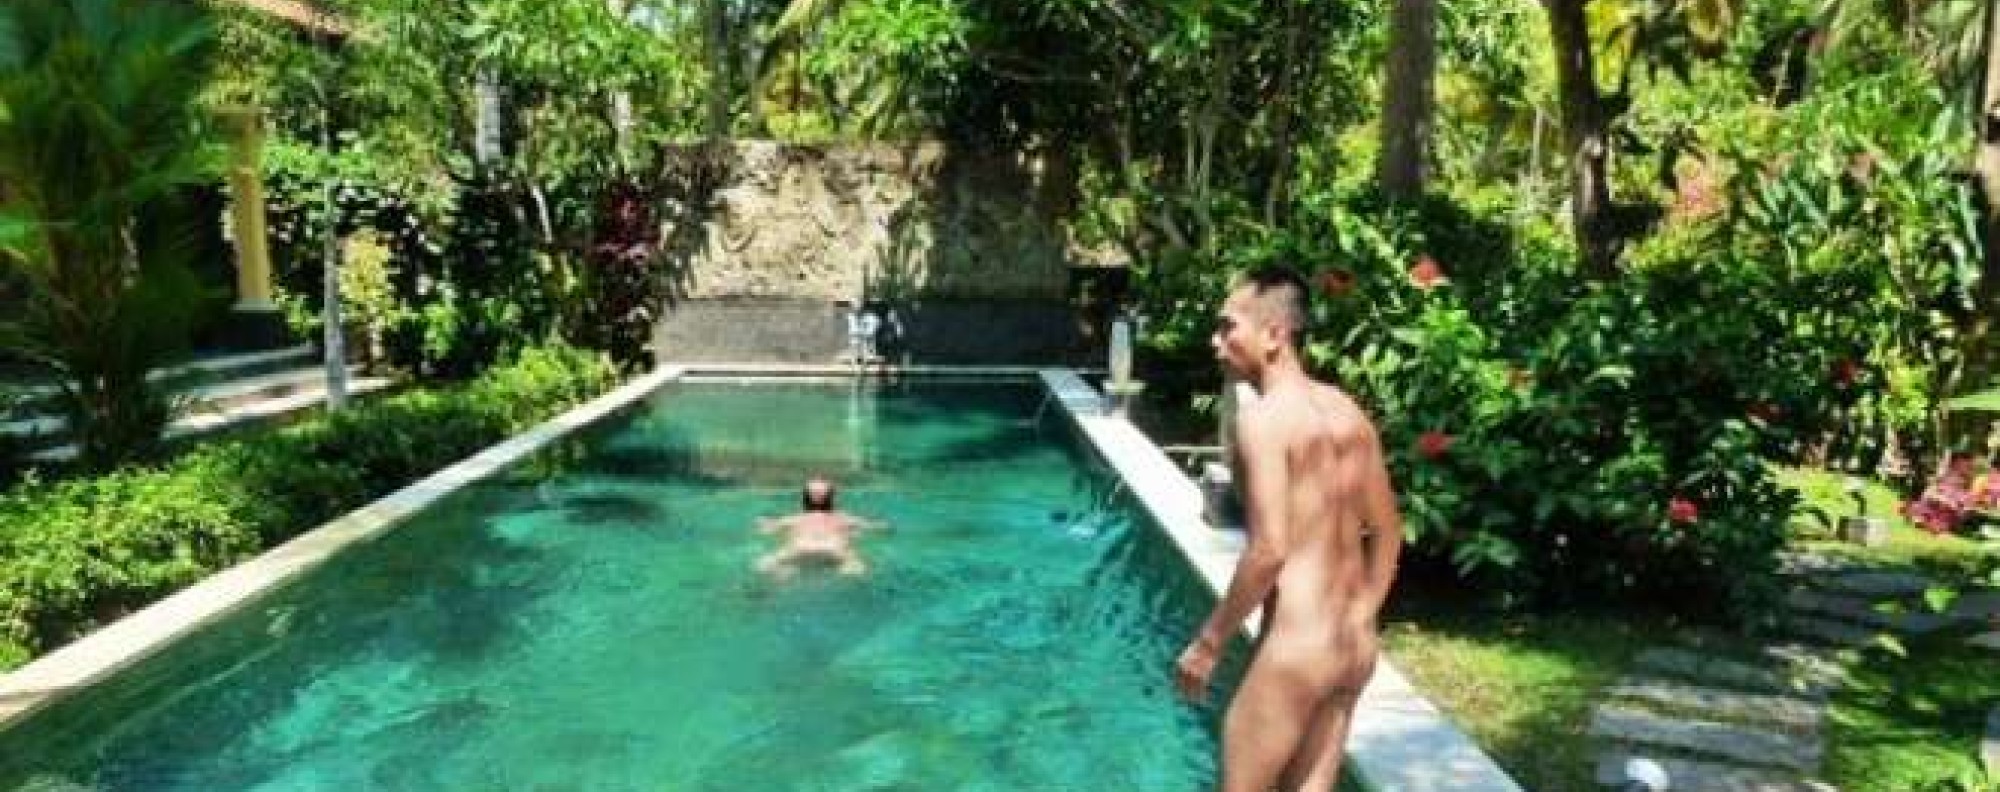 Asia for nudists the best places to bare it all on holiday South China Morning Post